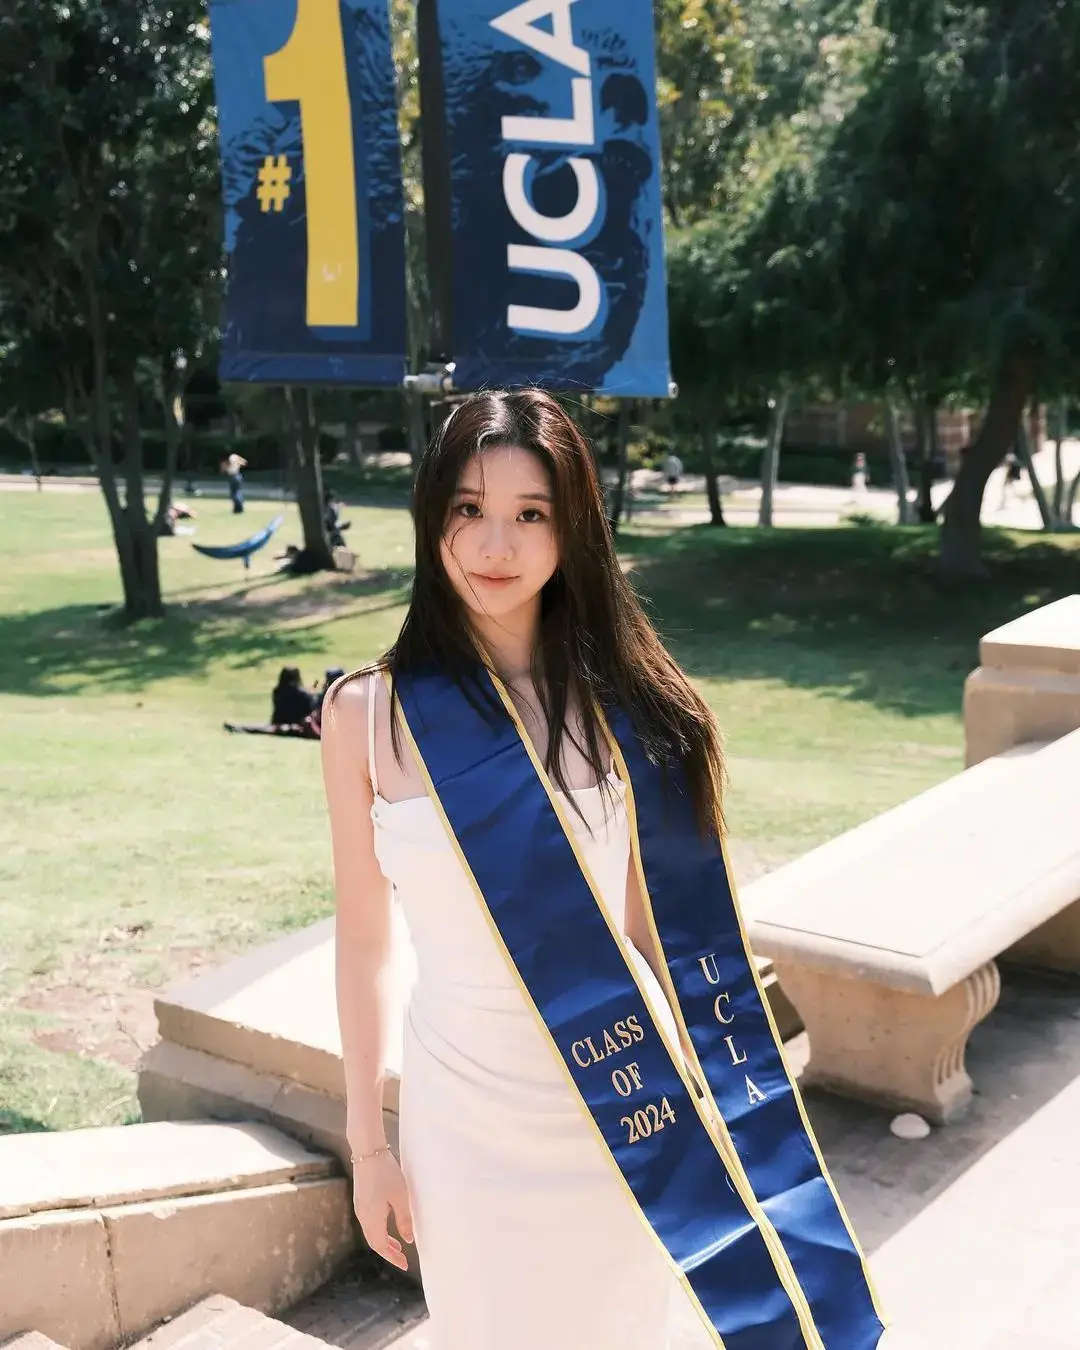 So what about the intellectual beauty from UCLA university? 👑#mydream #xuhuongtiktok #tiktok #instagram #xuhuong #graduate #university #UCLA #beauty 